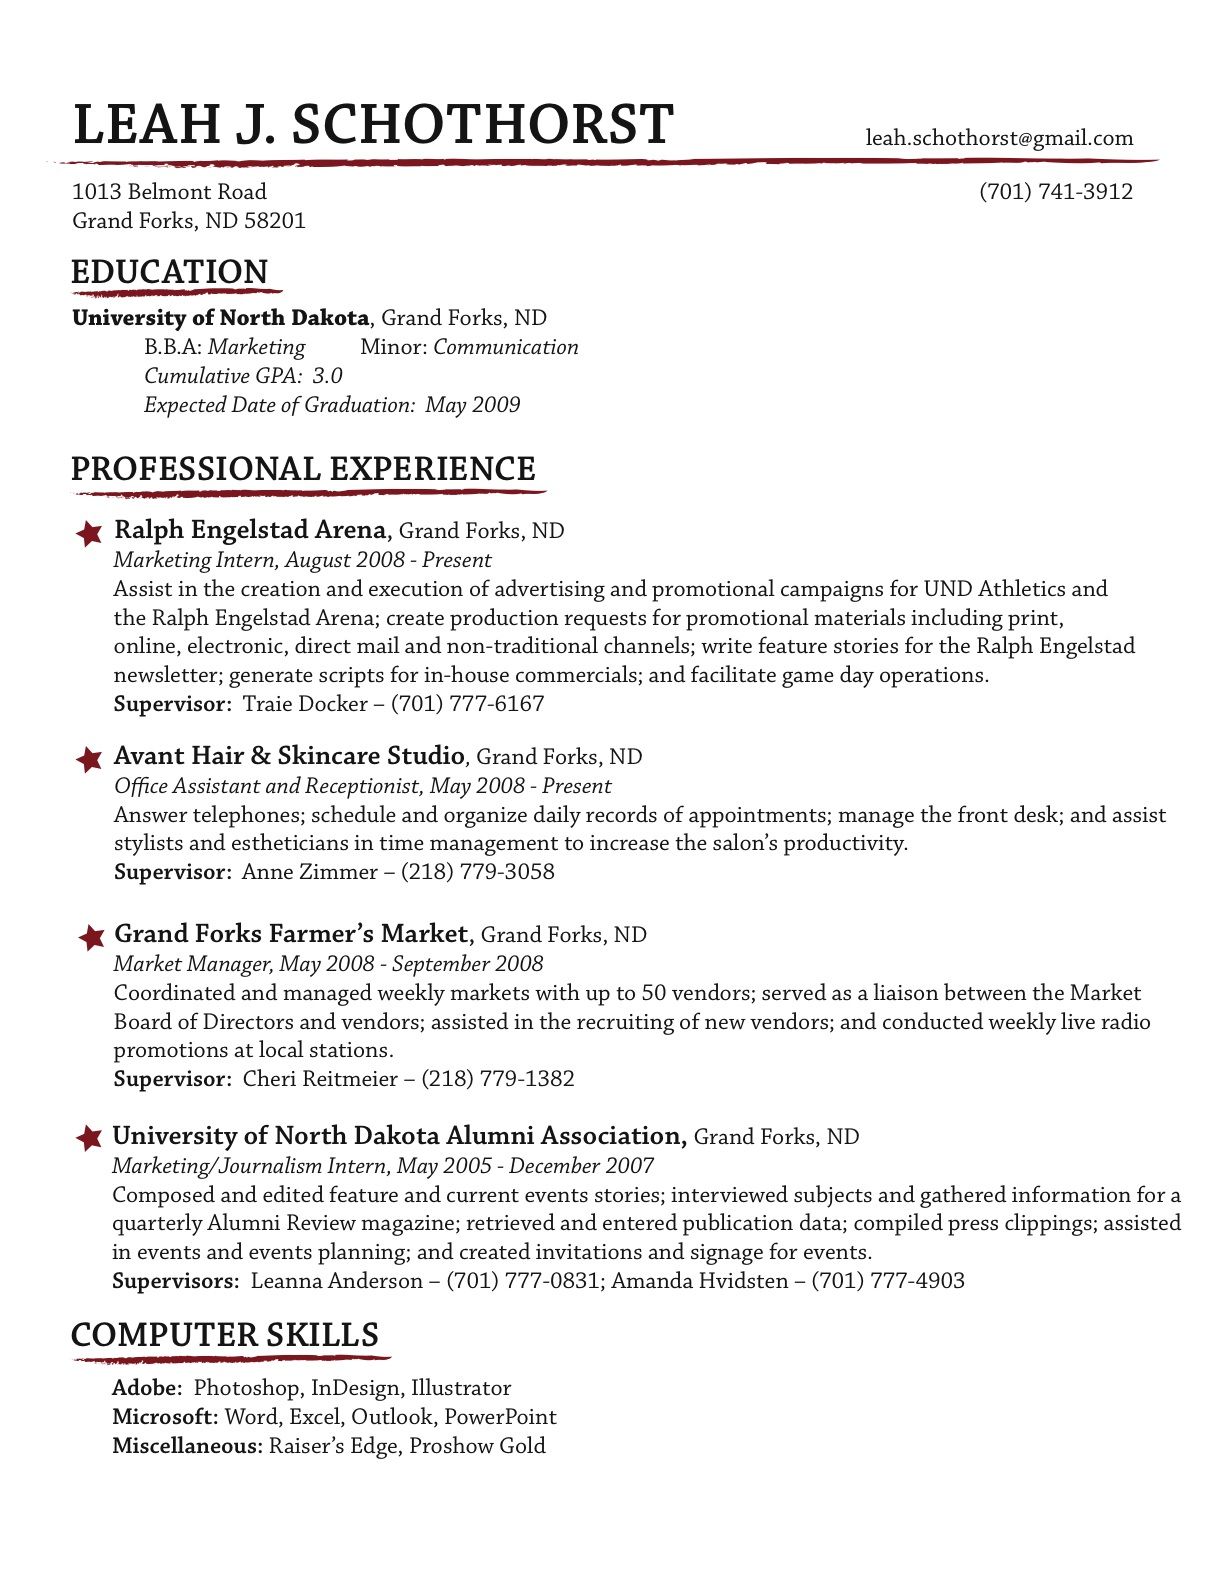 Creative Resume Resume Examples How To Make Resume Resume Tips